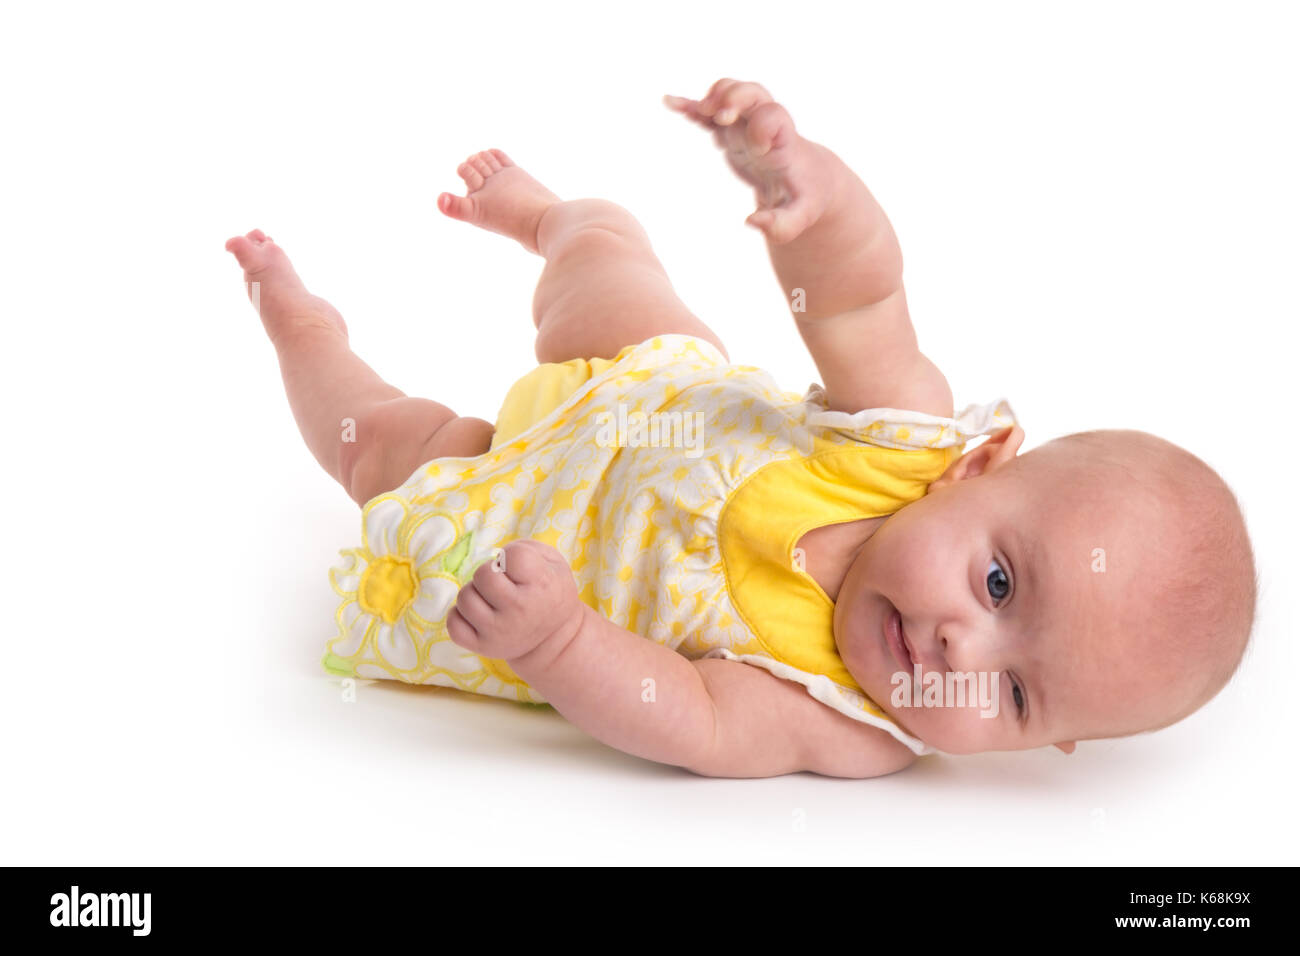 Cute baby rolling over isolated on white background Stock Photo